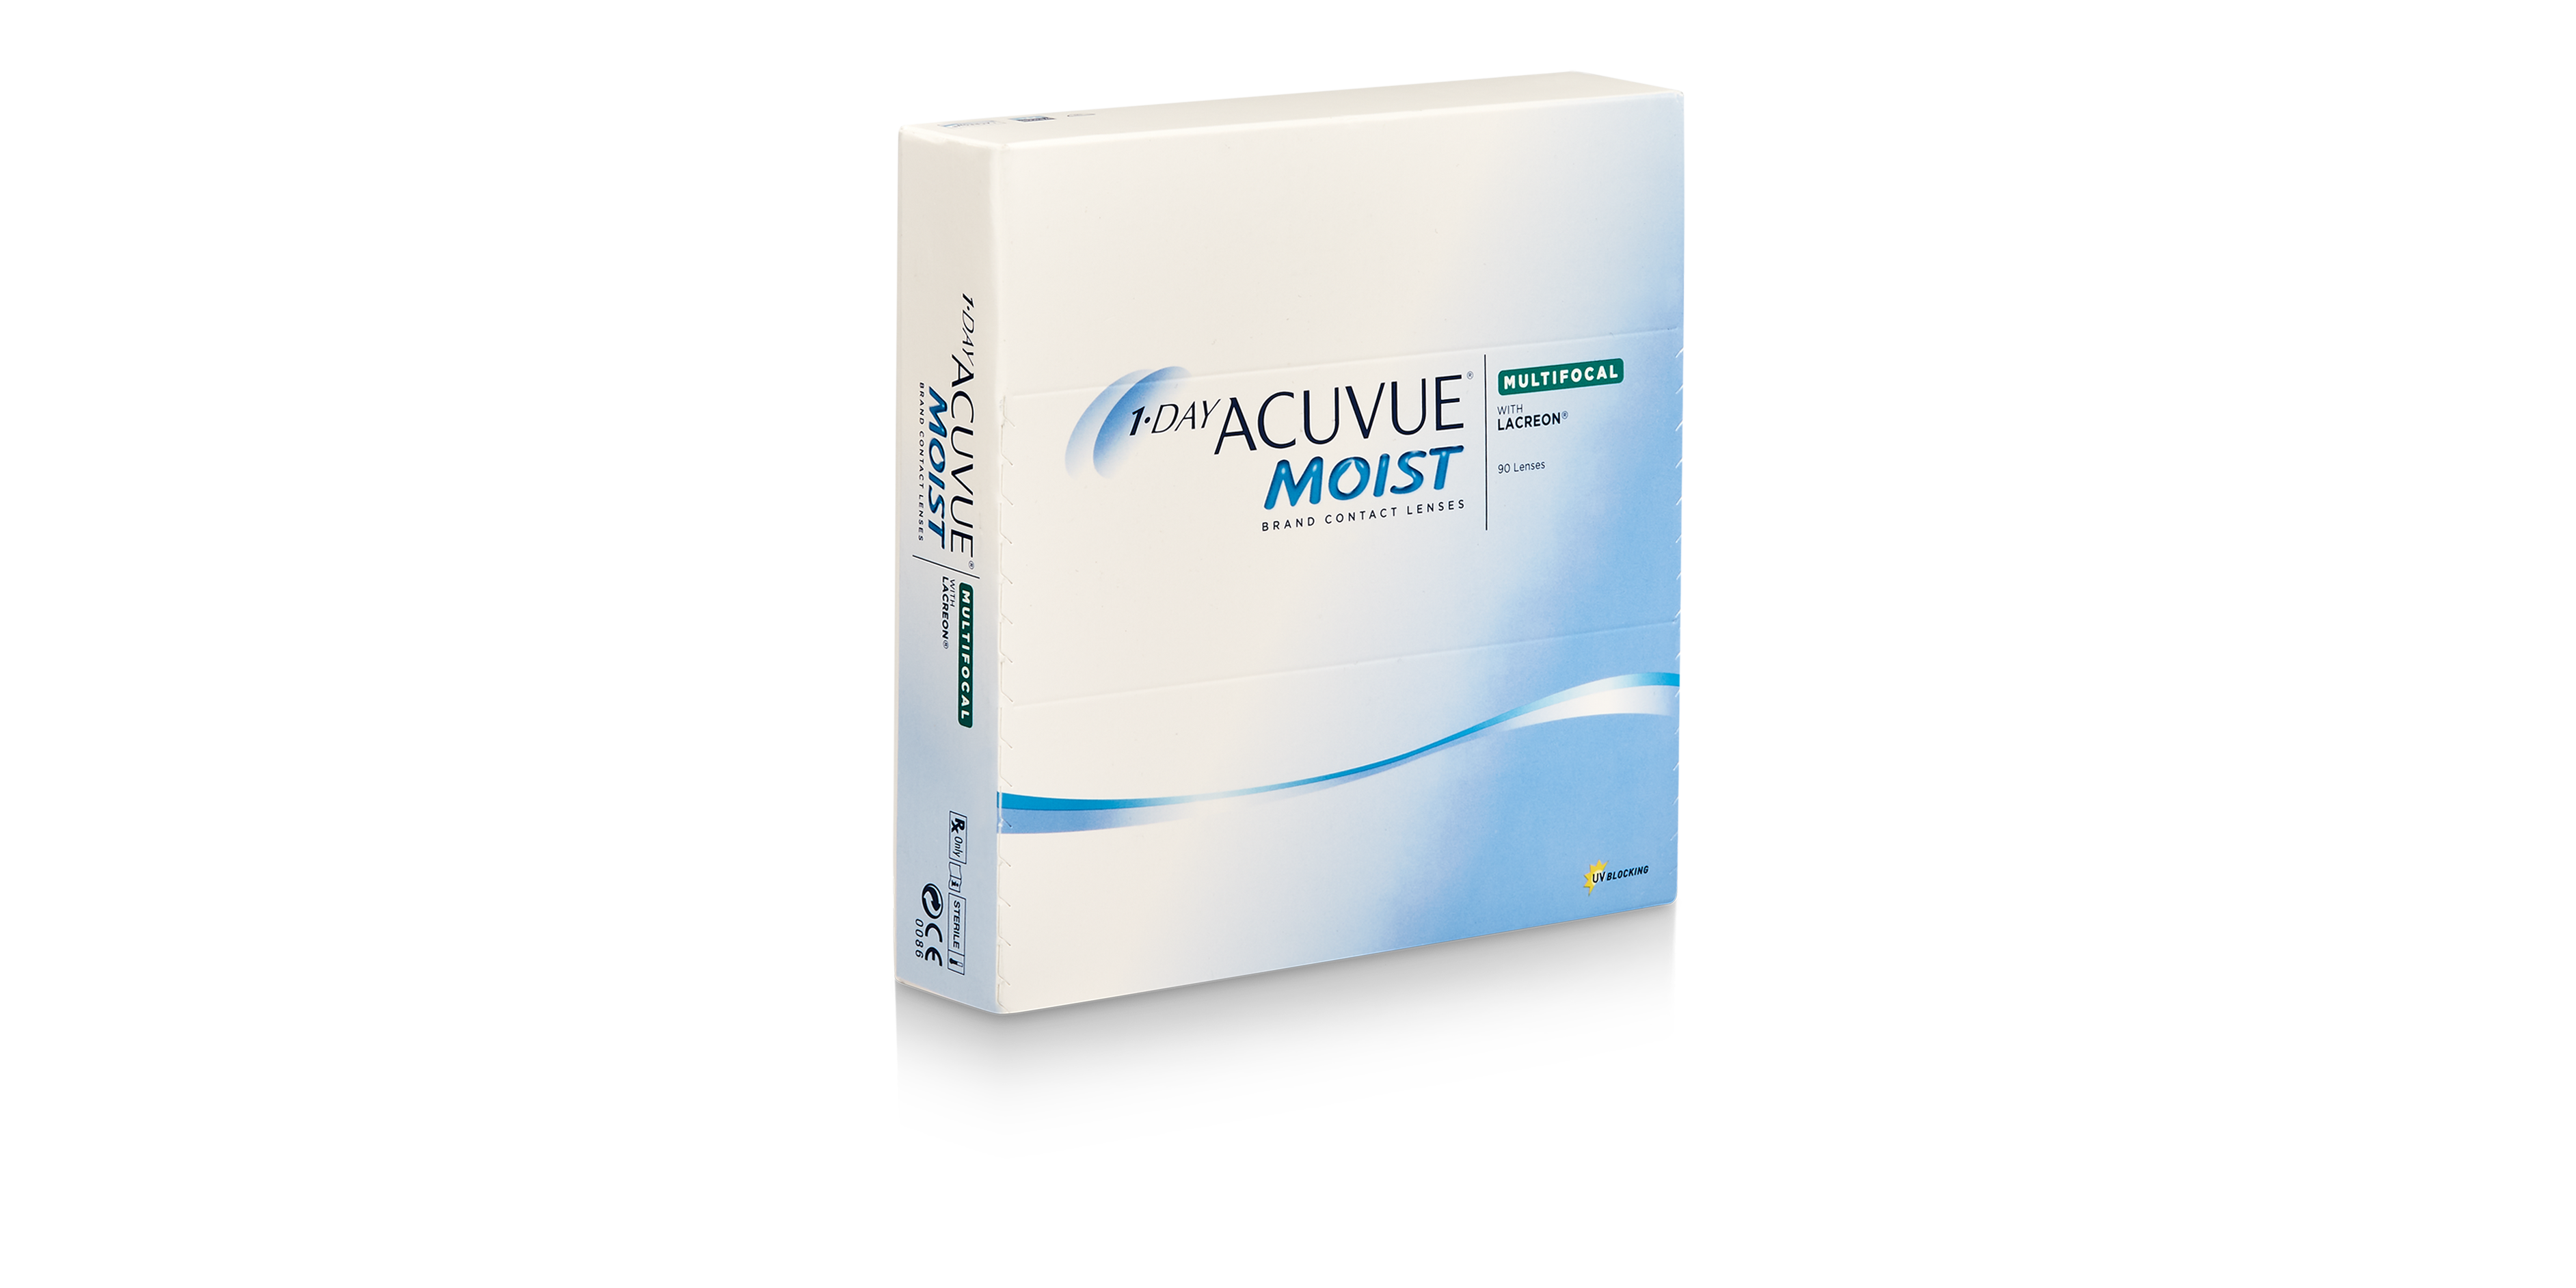 1-DAY ACUVUE® MOIST MULTIFOCAL, 90 pack